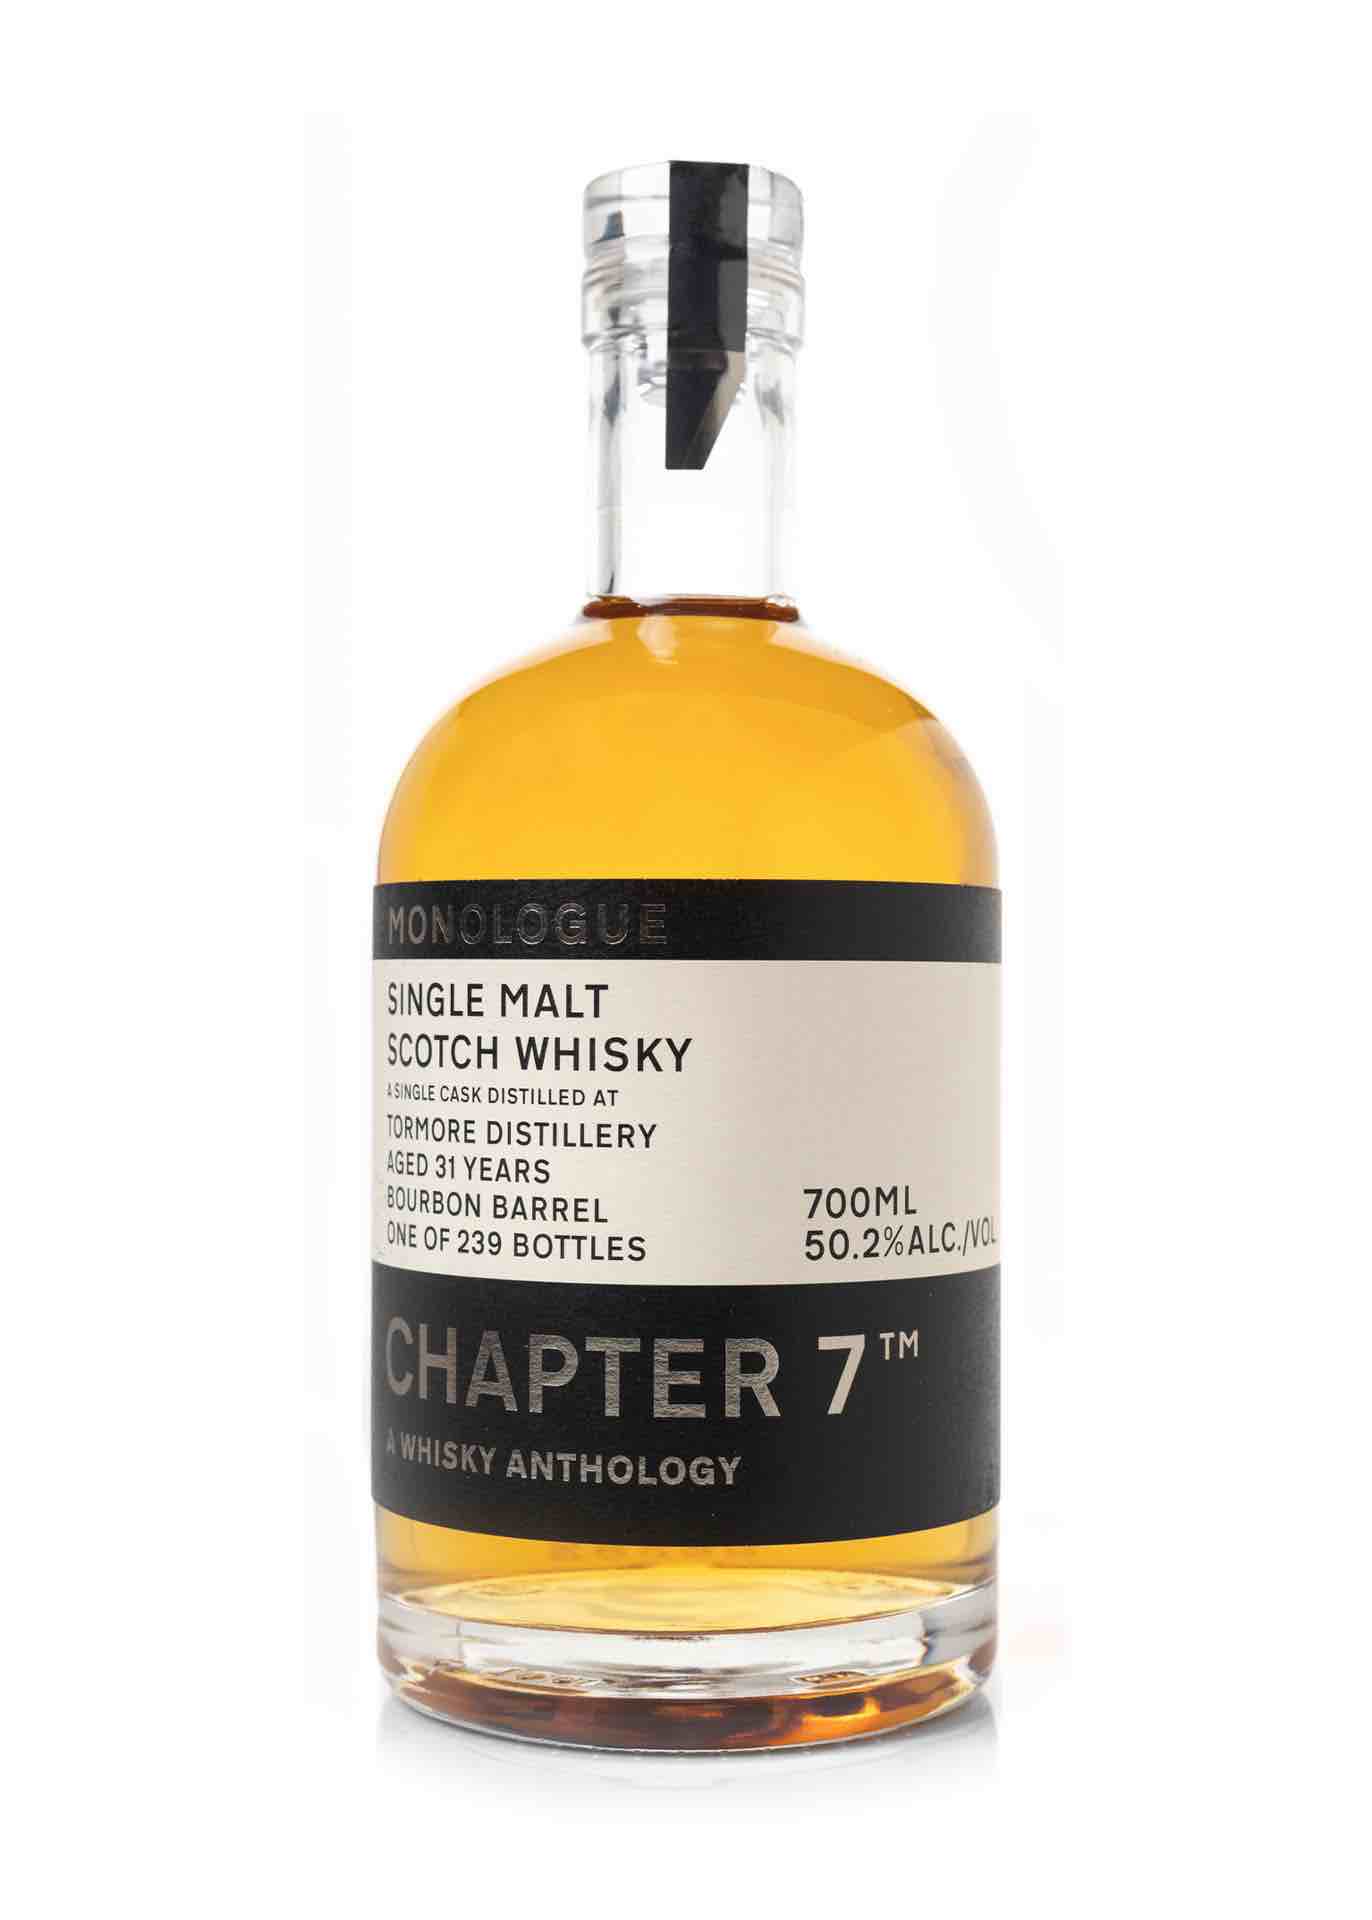 Chapter 7: Monologue Tormore 31 Year Old Single Malt Scotch Whisky